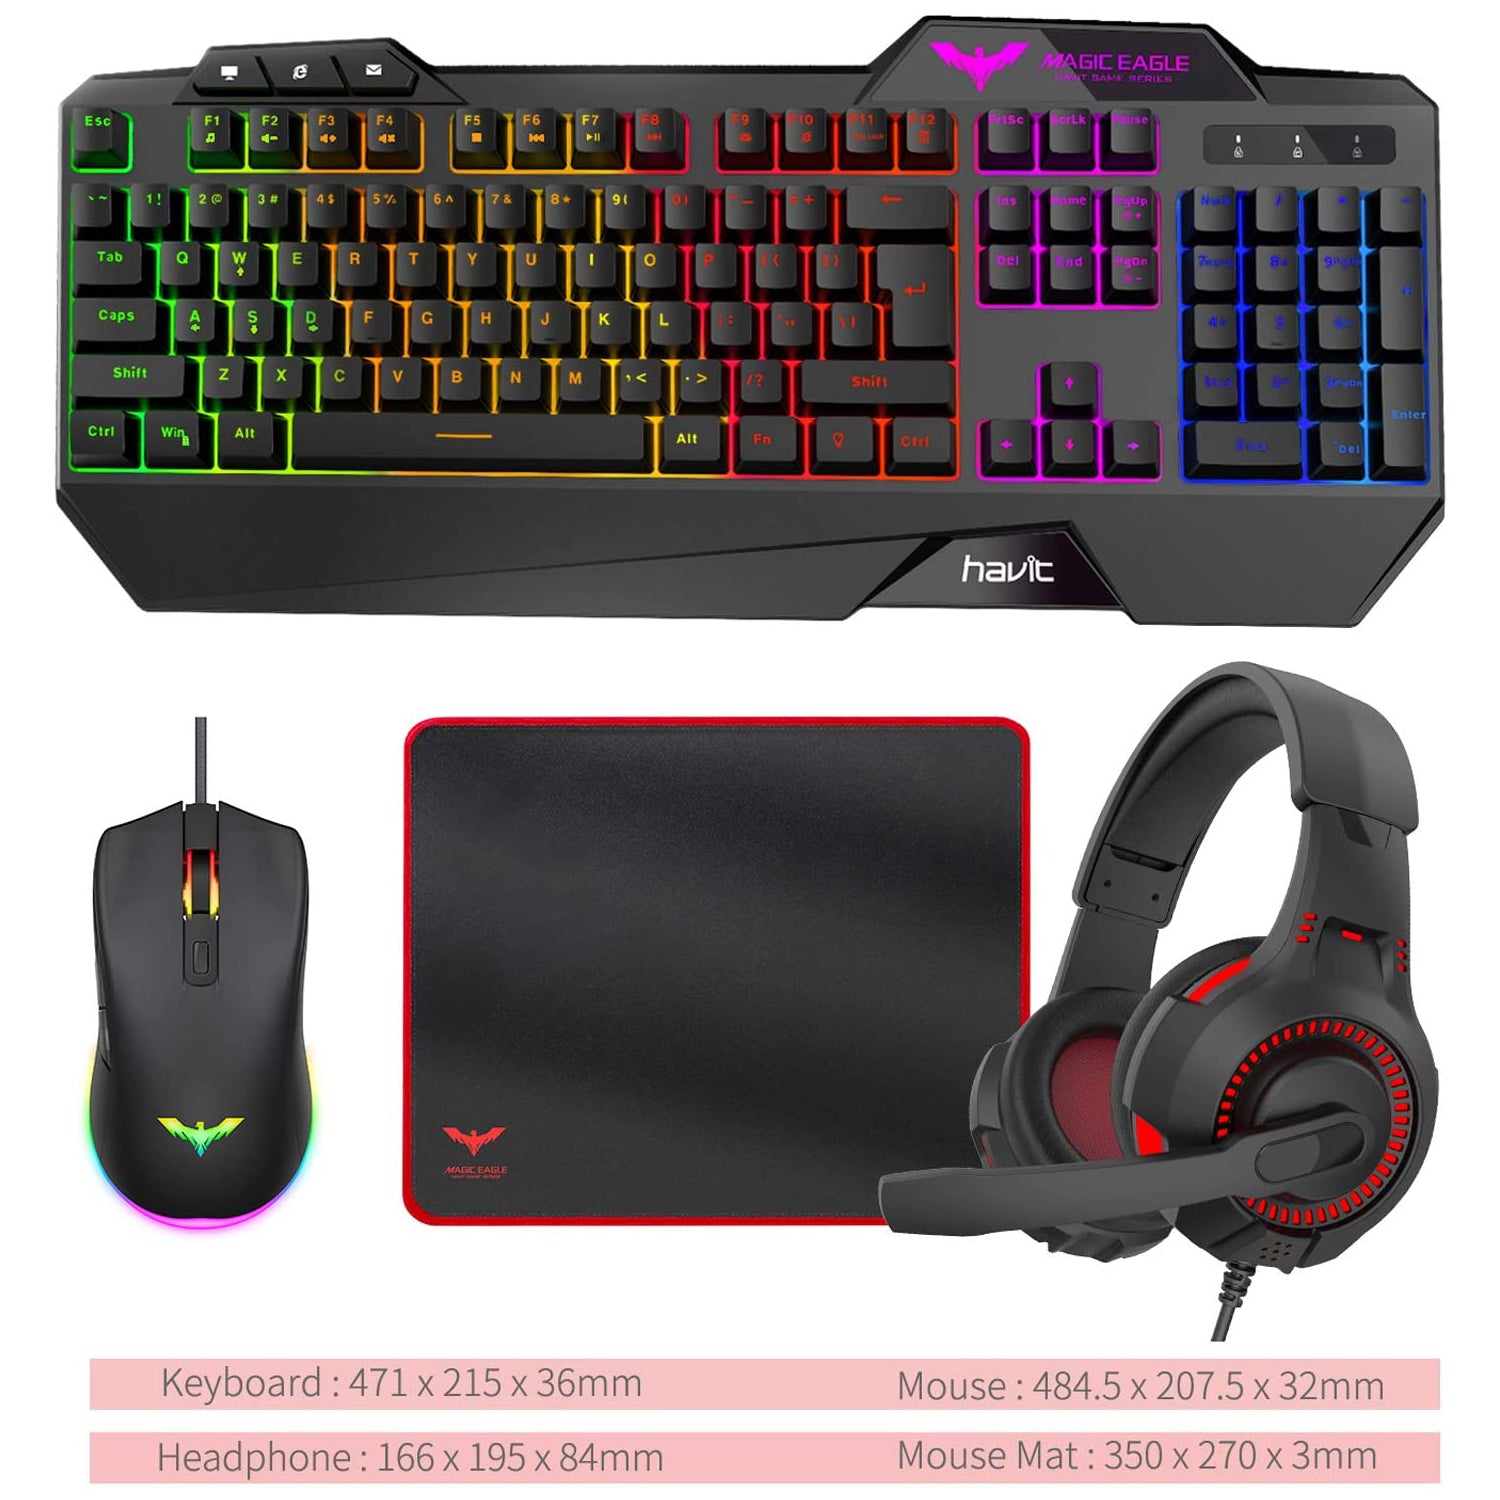 HAVIT KB392L Gaming Keyboard + Mouse + Mouse Pad + Headset Combo